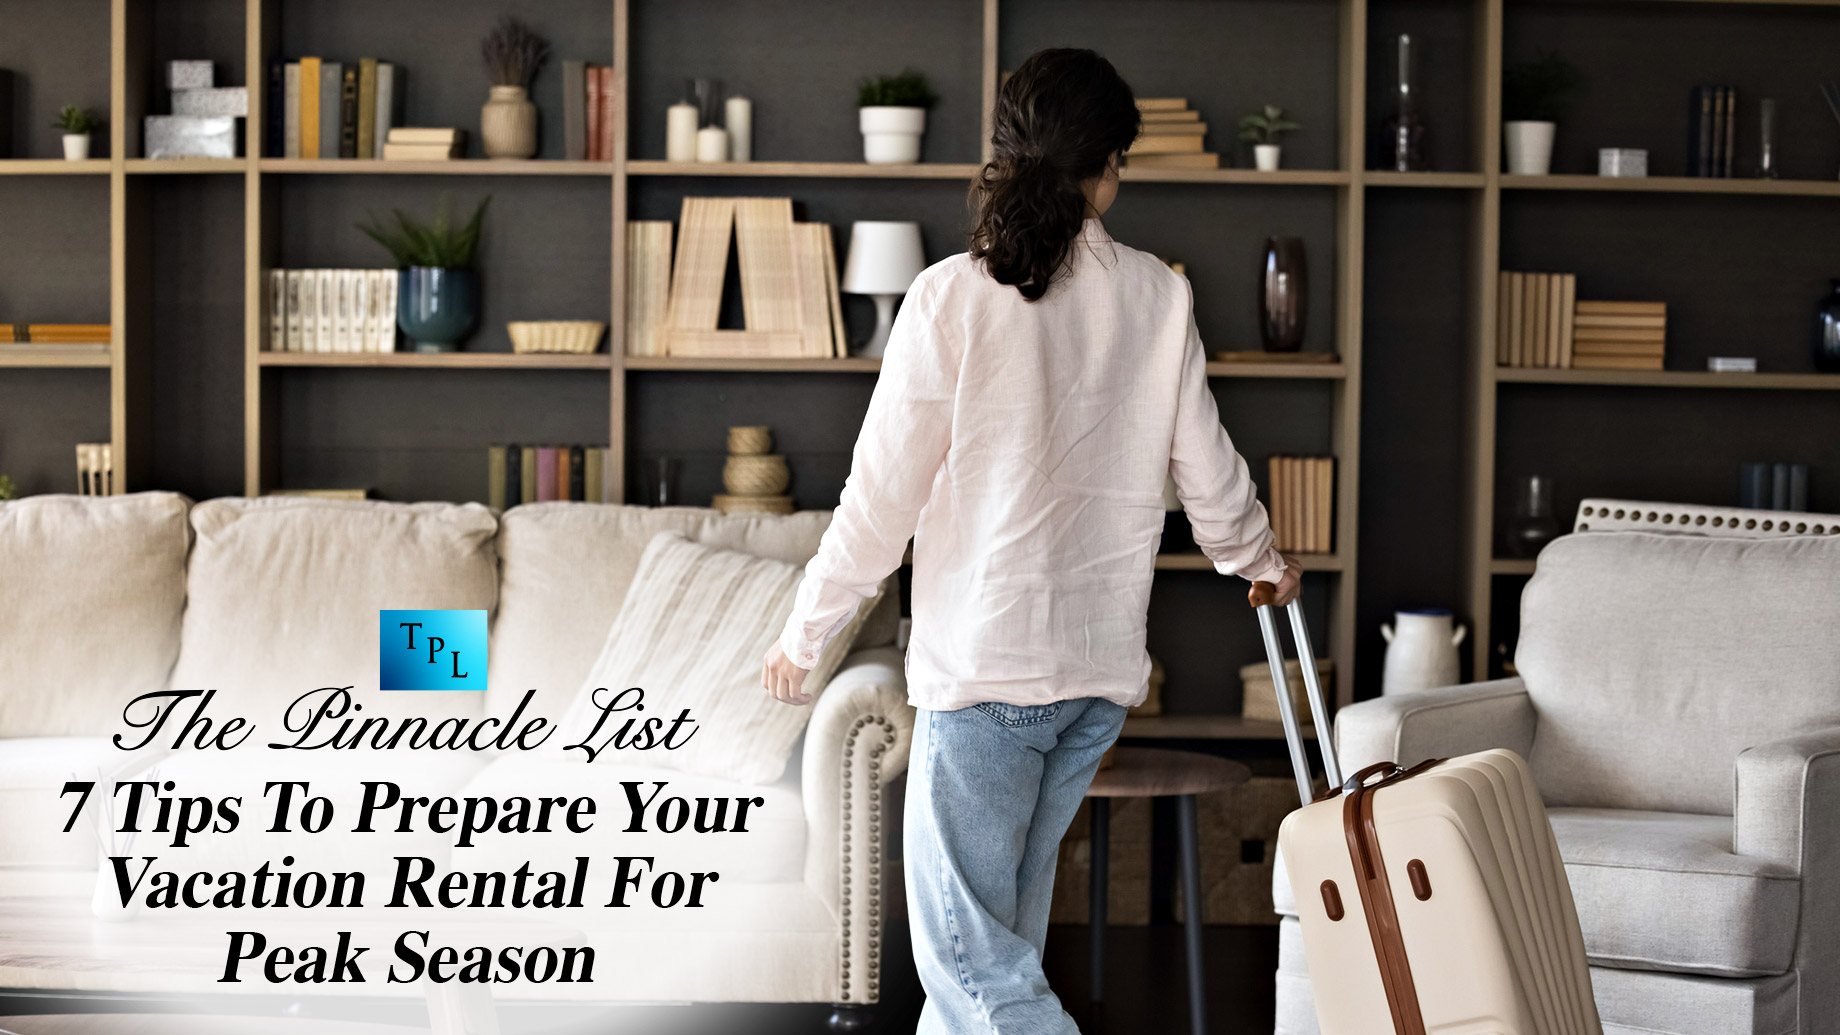 7 Tips To Prepare Your Vacation Rental For Peak Season